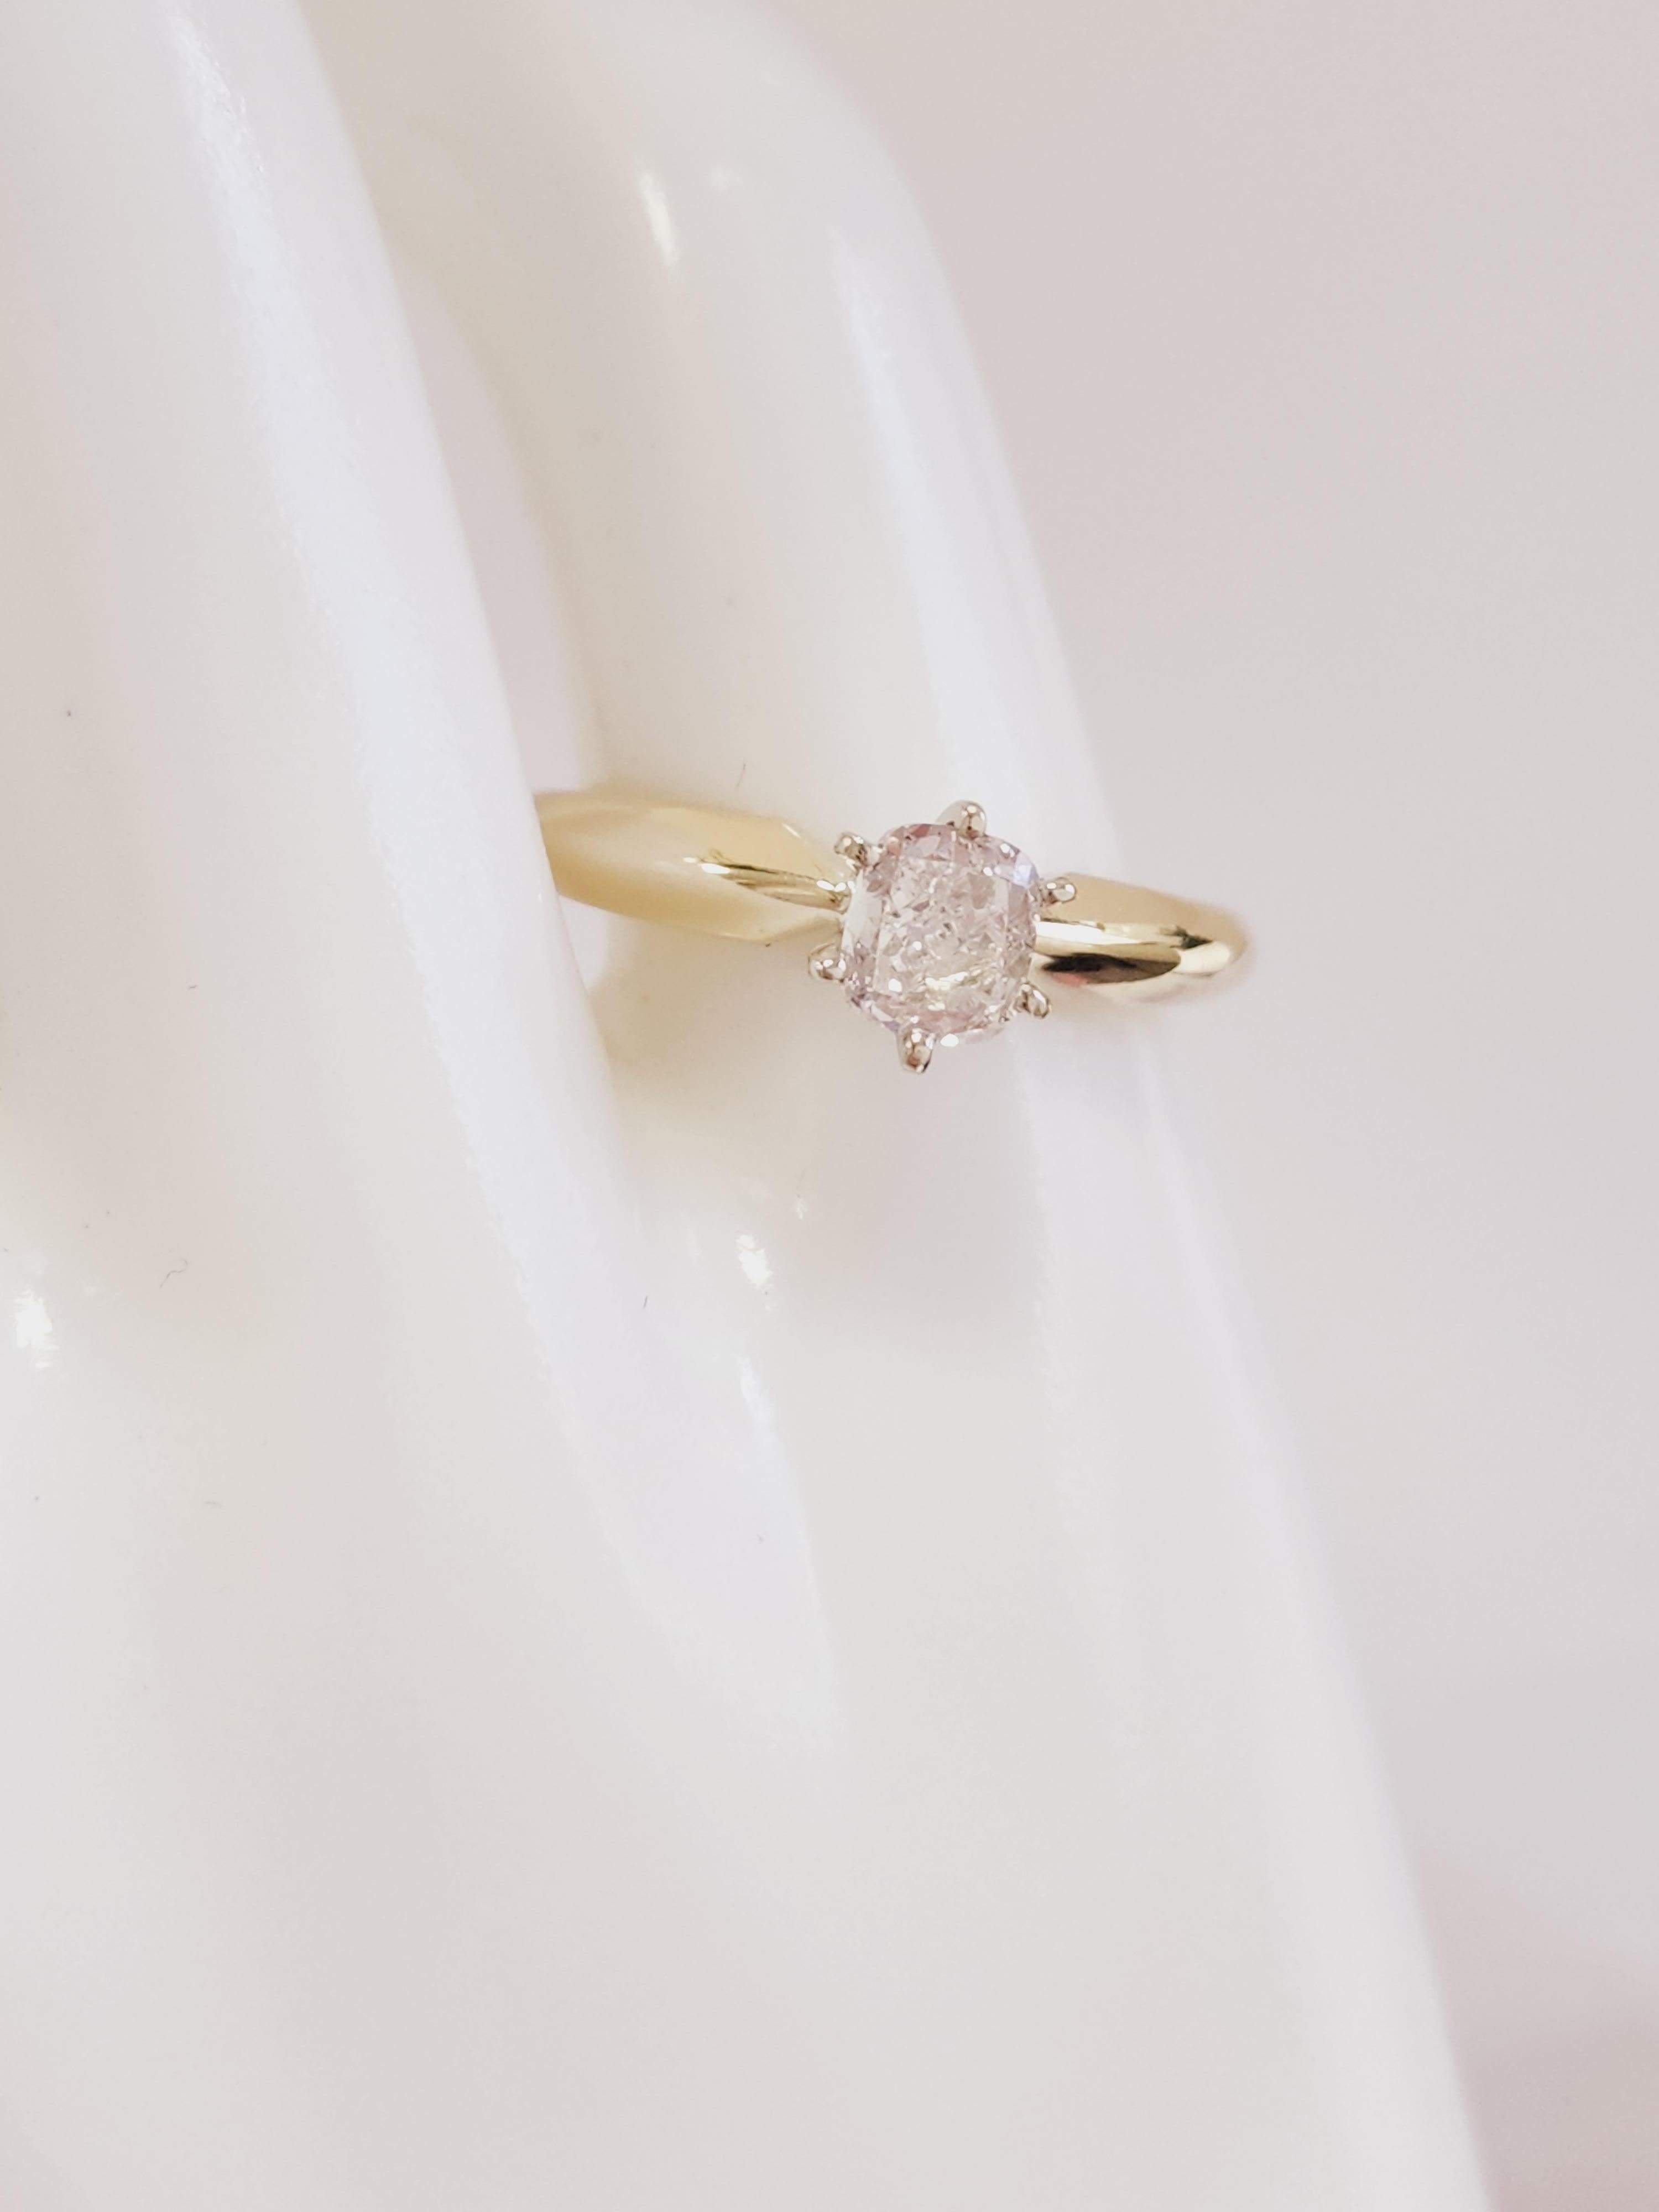 GIA 0.53 Carat Cushion Pink Diamond Solitaire Ring 14K Yellow Gold In New Condition For Sale In Great Neck, NY